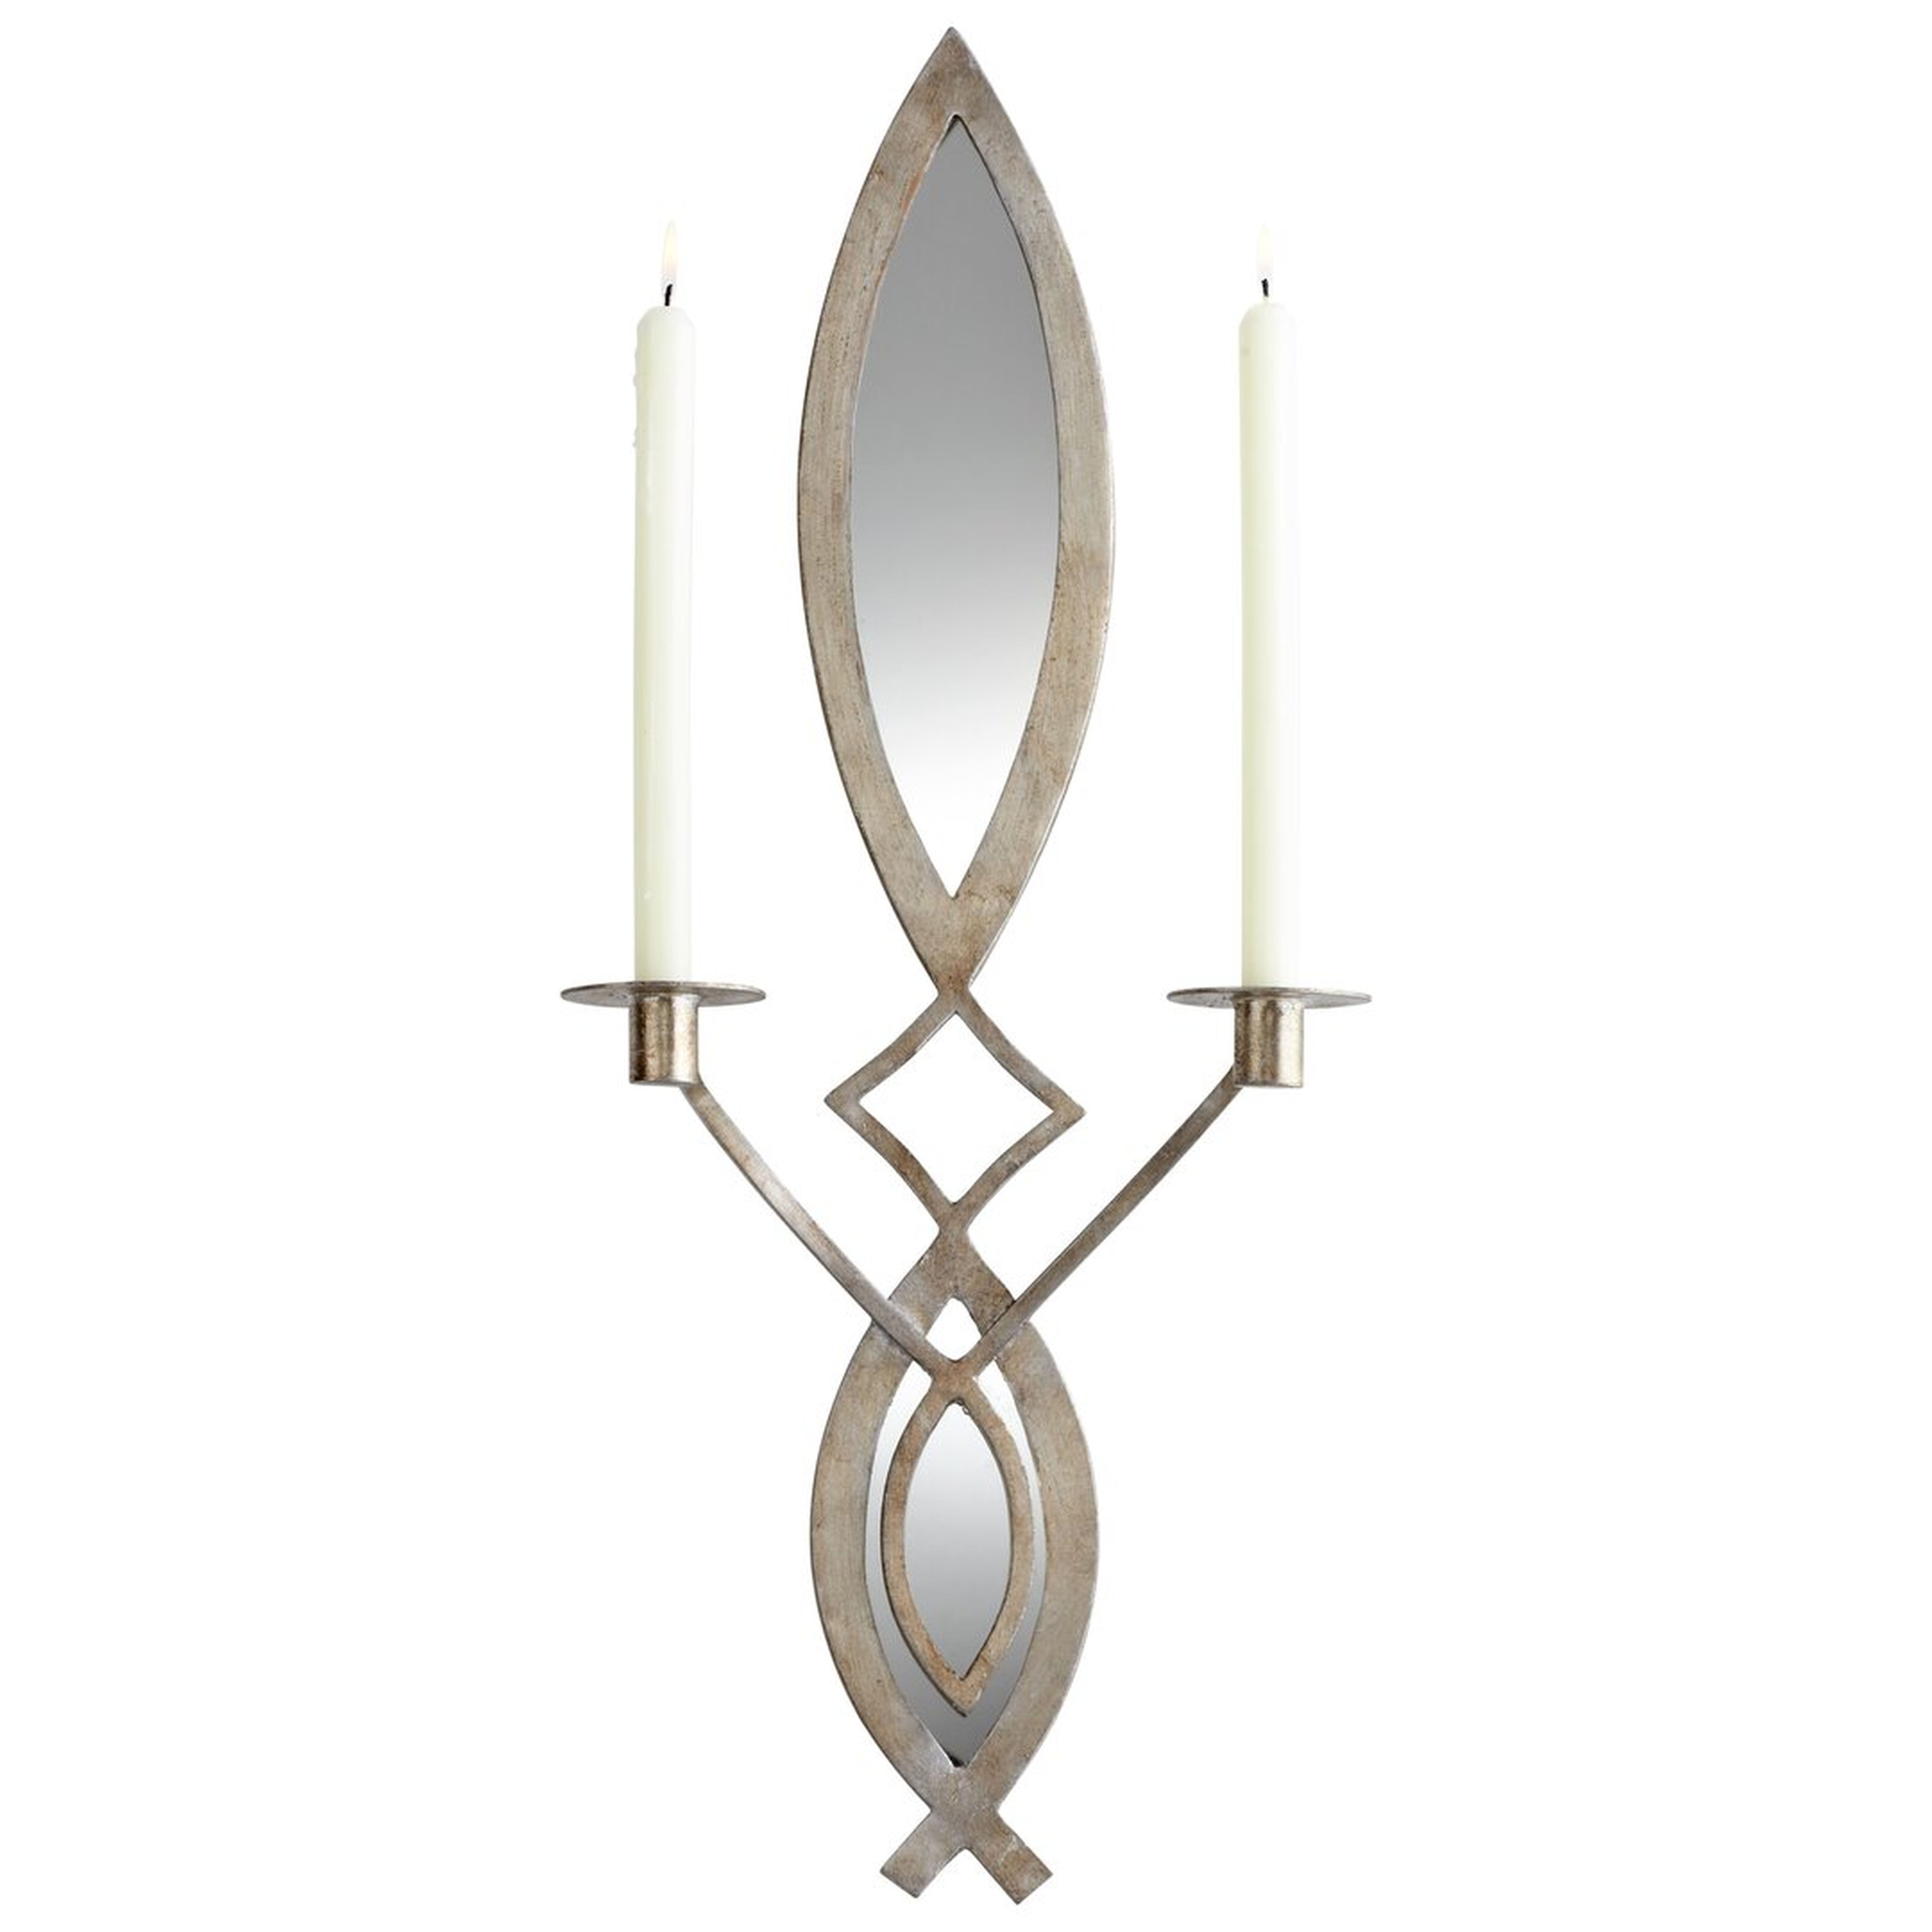 "Cyan Design Exclamation 28"" Iron Wall Sconce with Candle Included" - Perigold